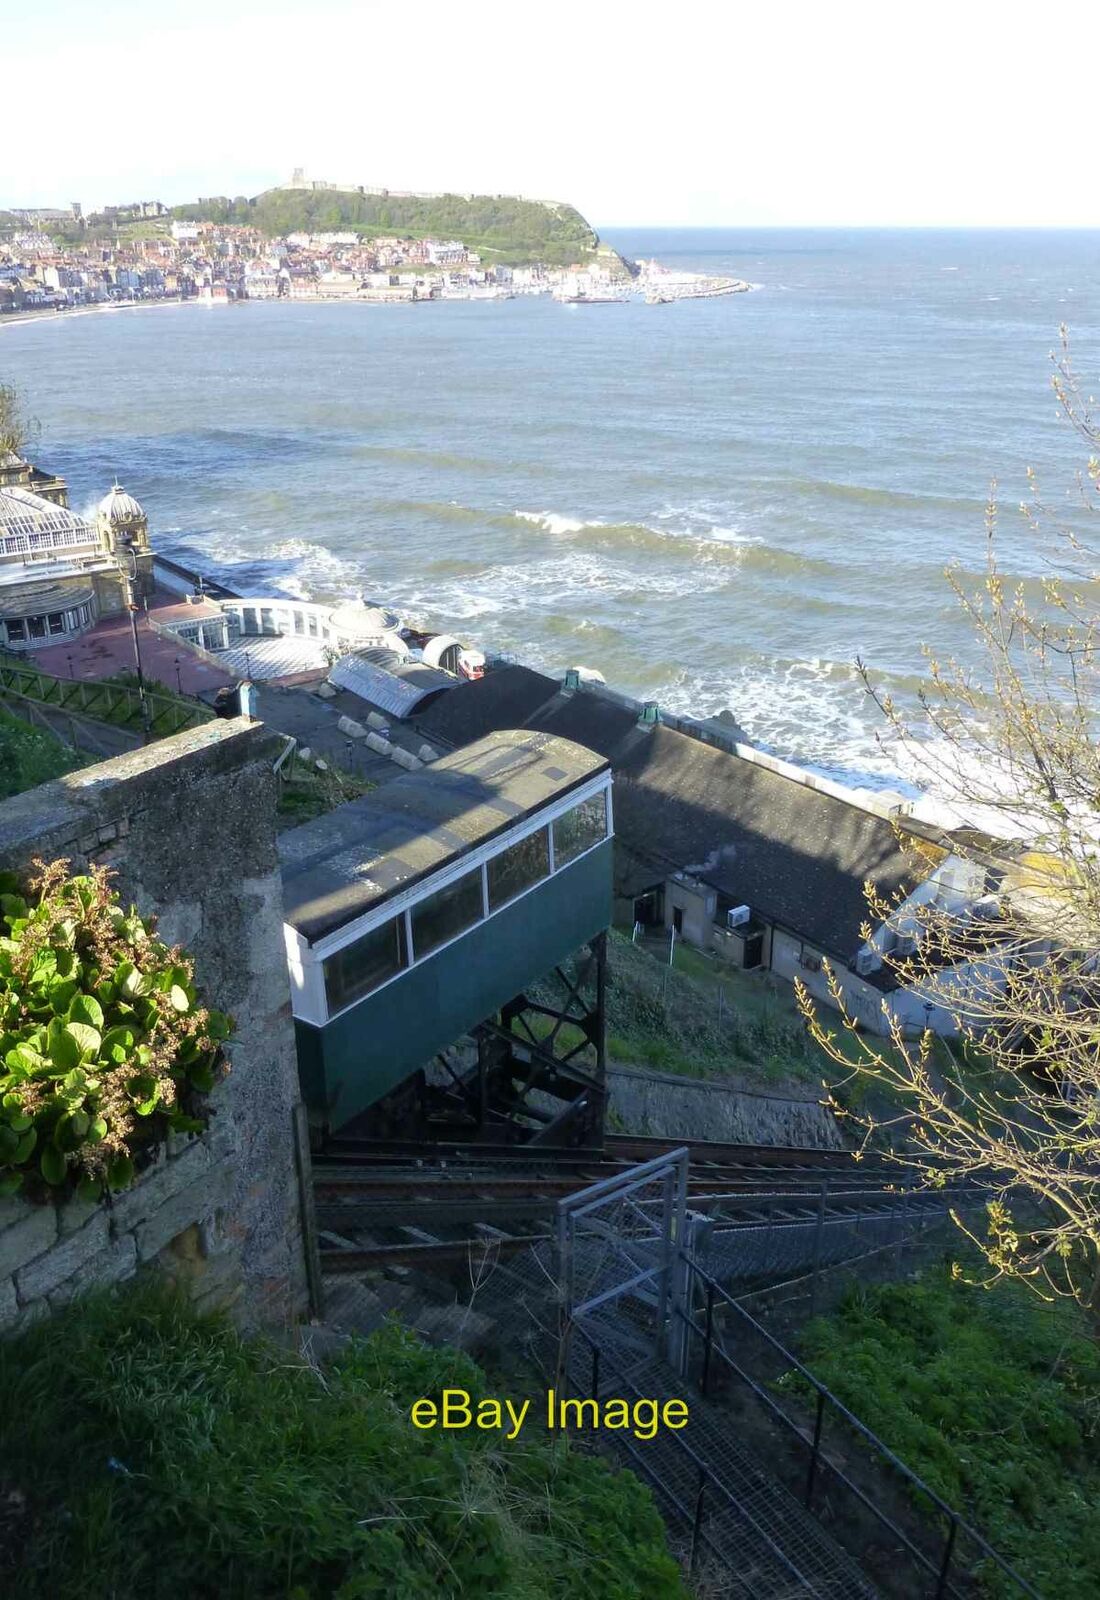 Photo 6x4 Cliff Railway Scarborough From the Spa to the Esplanade and dow c2017